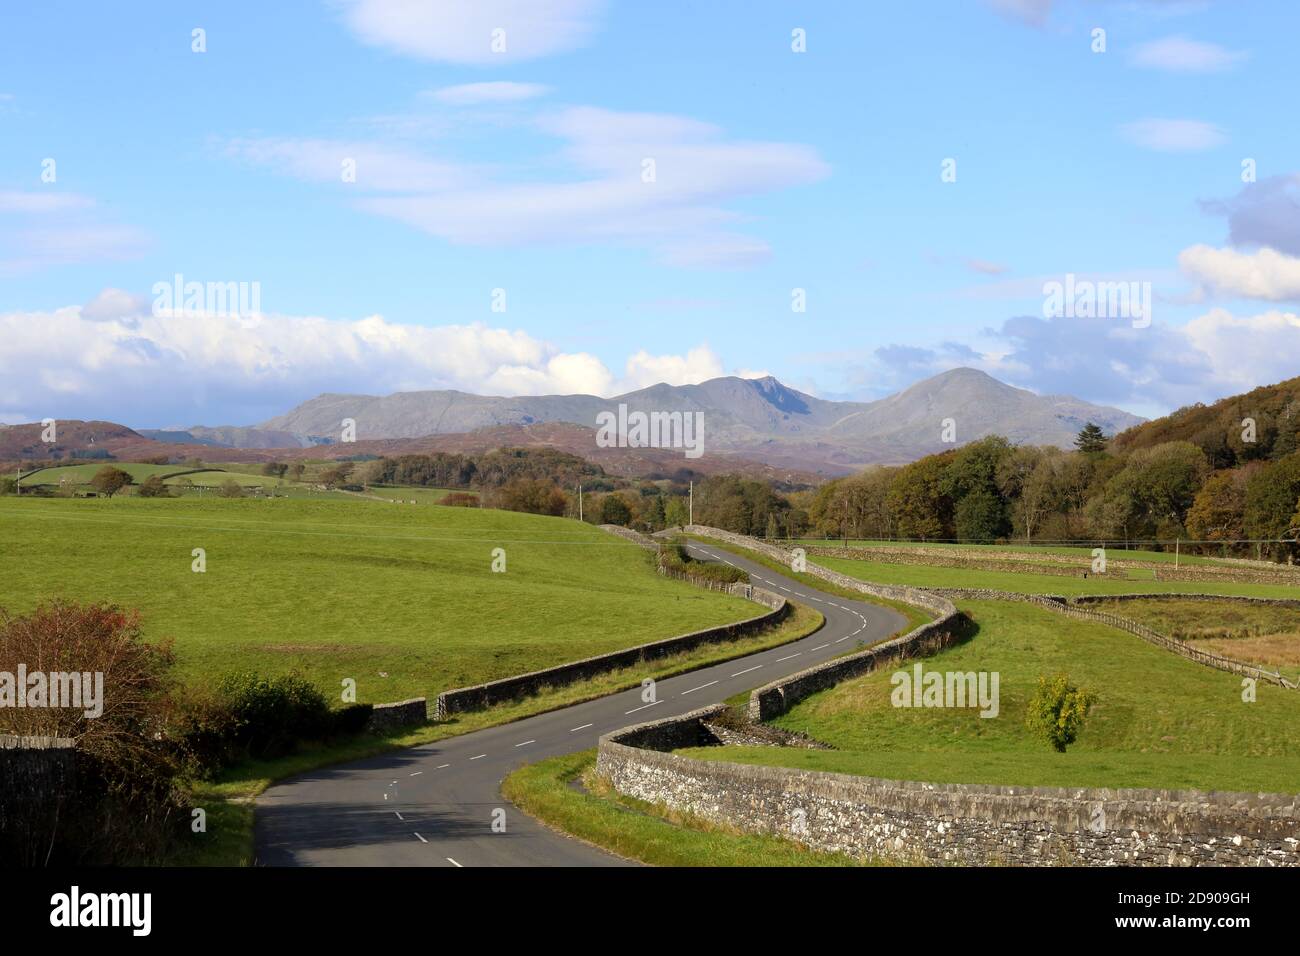 Low road to the High Lands. South Cumbria road twists and turns towards the Coniston Old Man range in the Cumbrian mountains of Northern England. Stock Photo